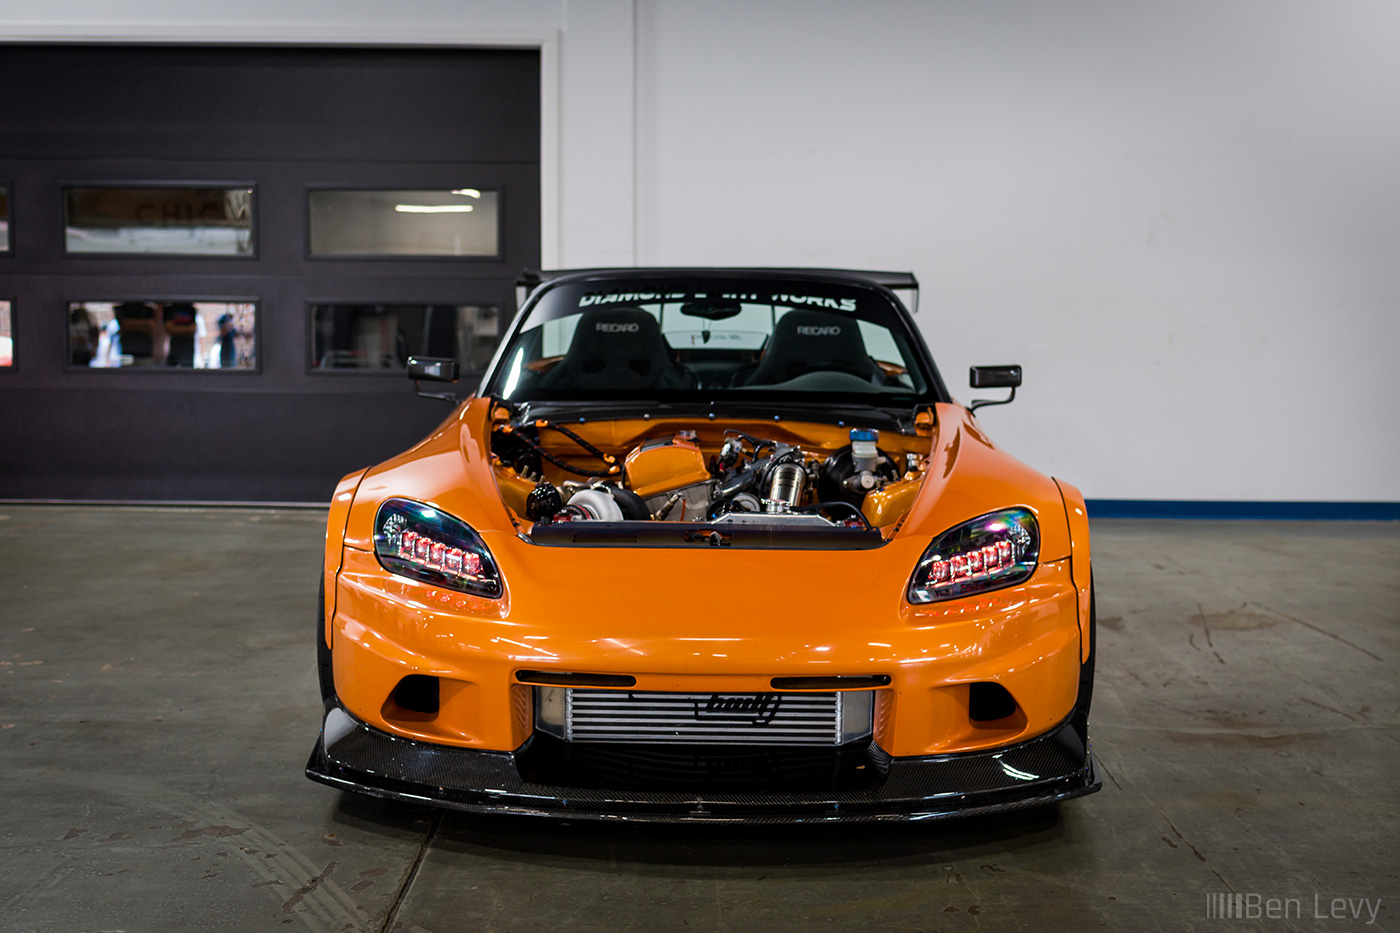 Front of Orange Honda S2000 at Chicago Auto Pros in Lombard